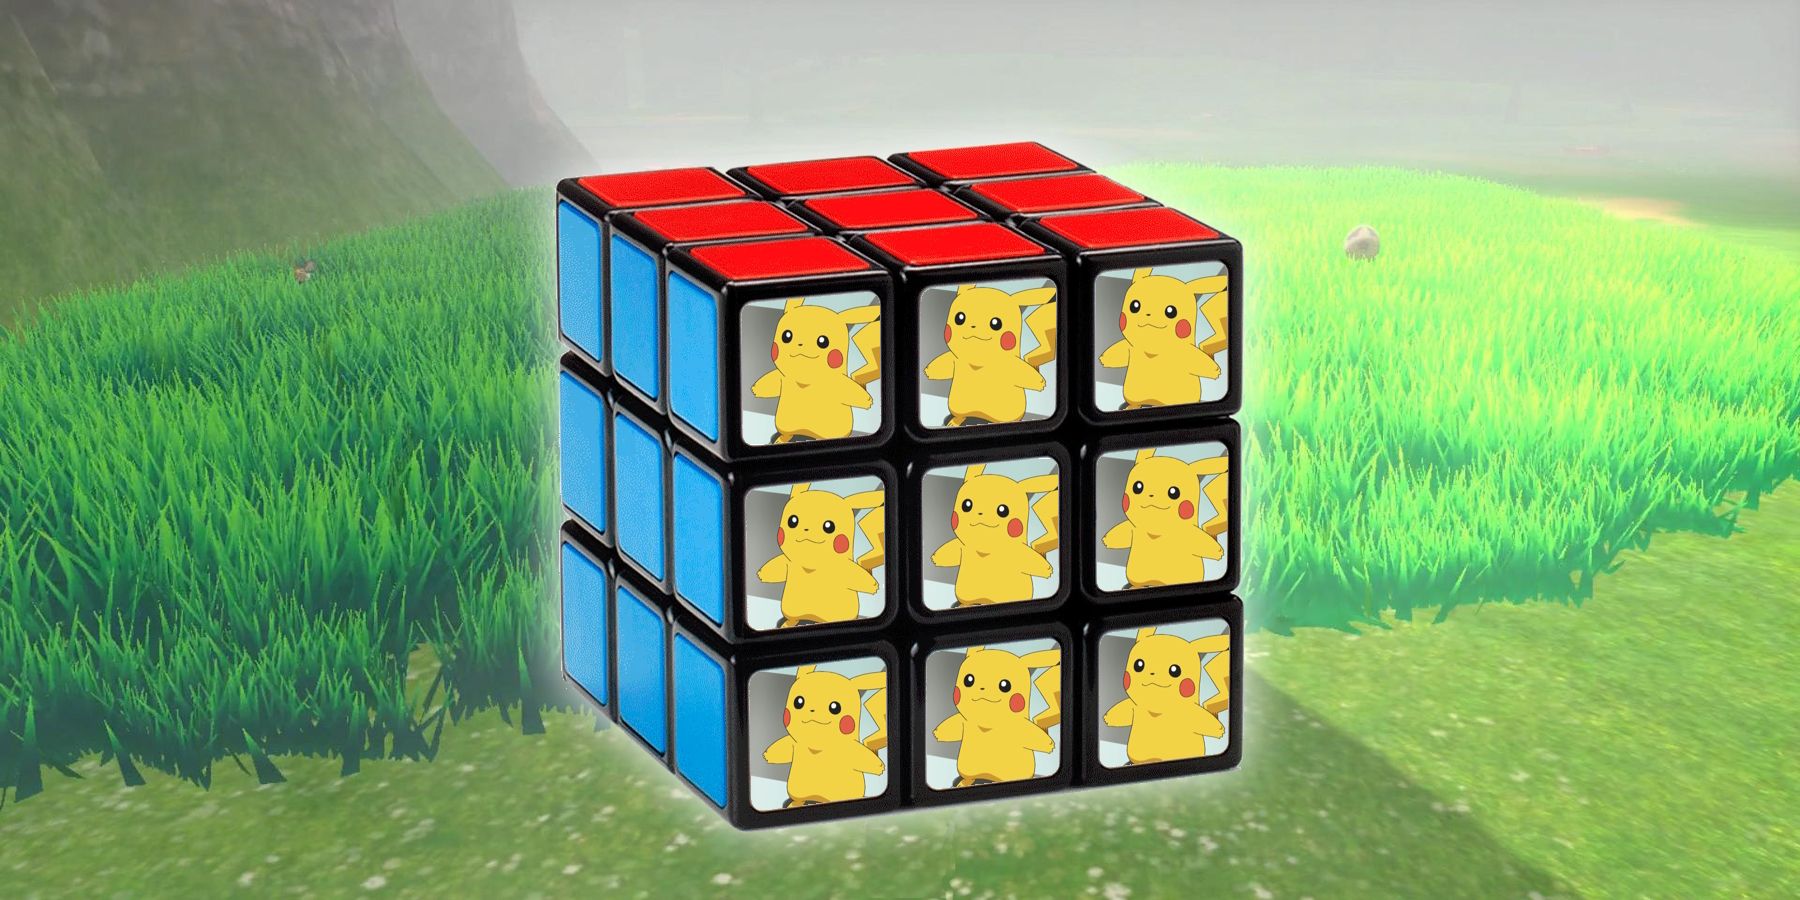 A Rubiks Cube covered in Pikachu pictures